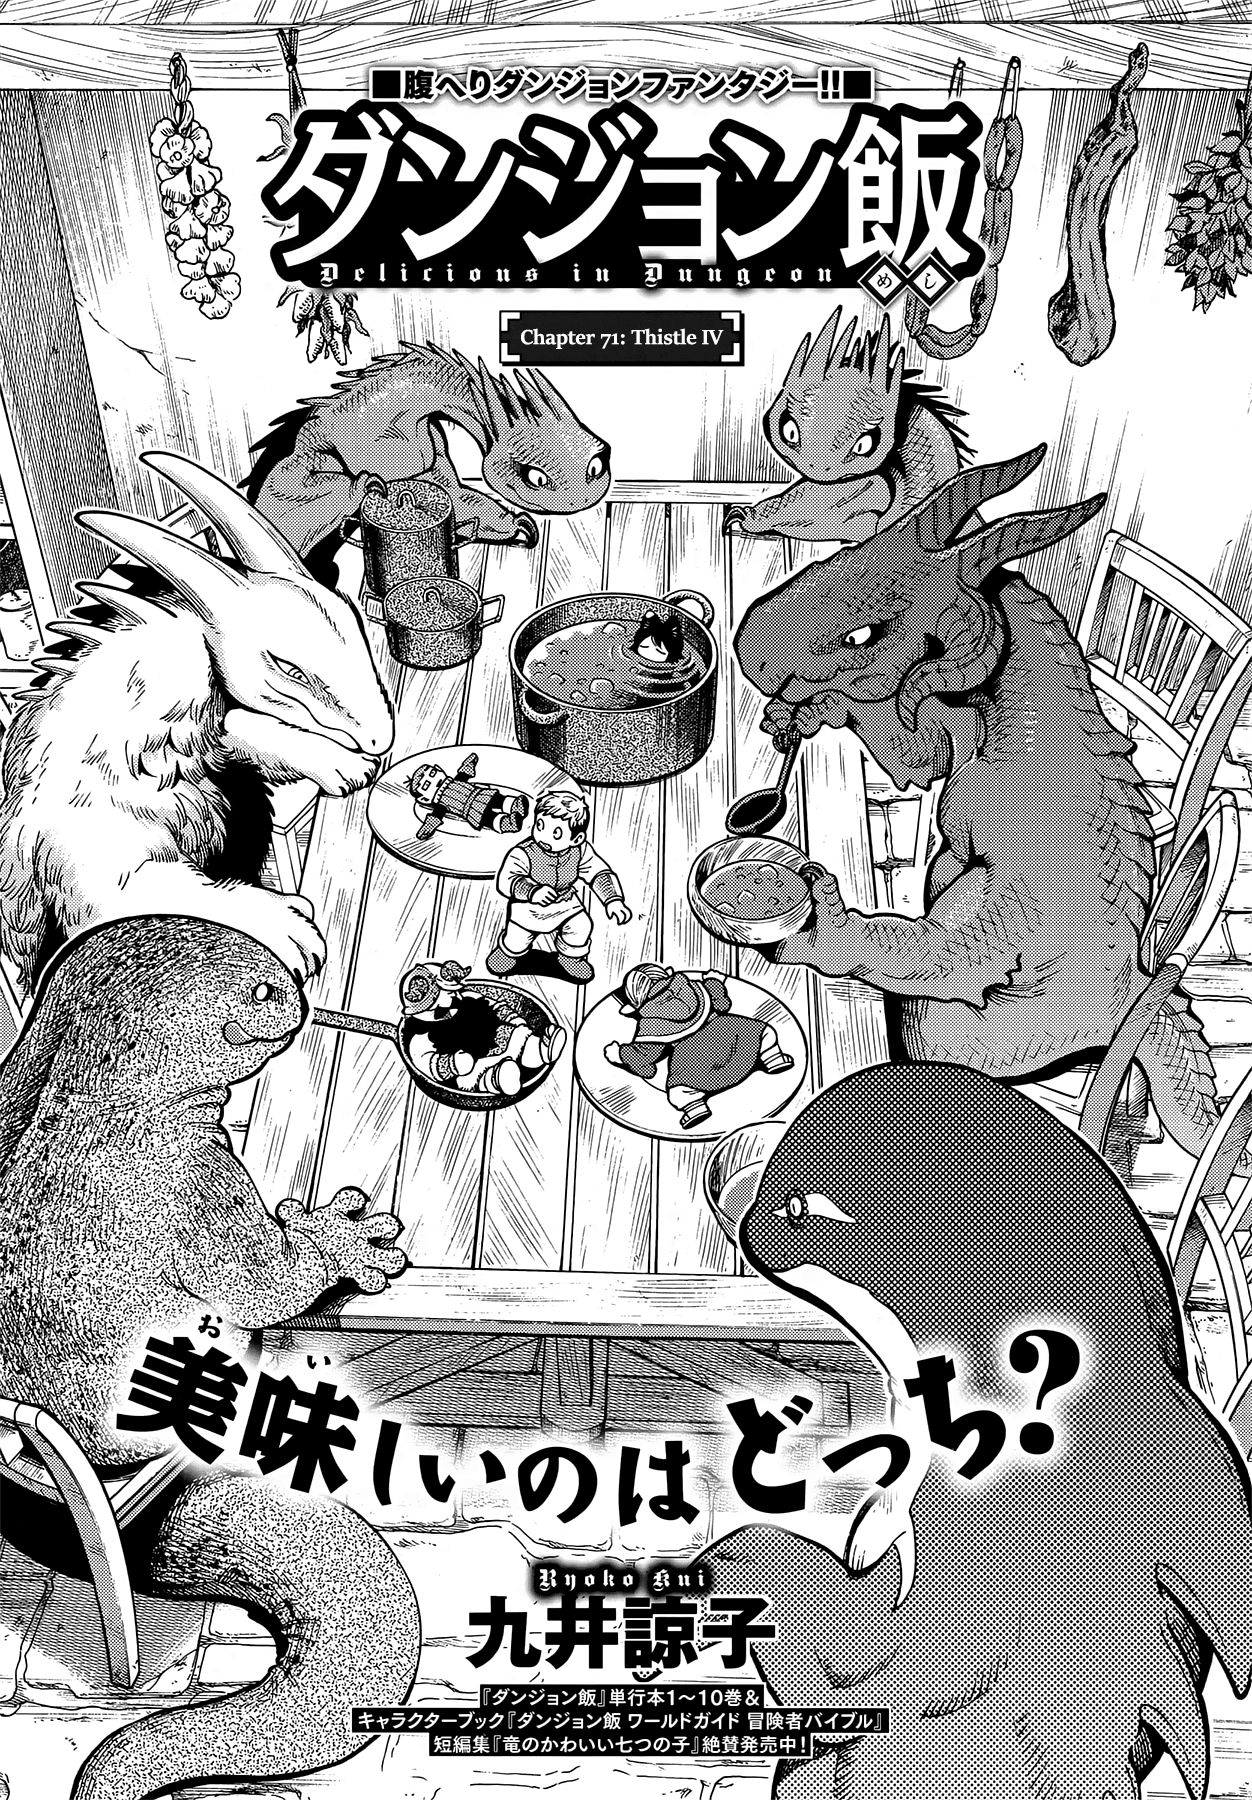 Dungeon Meshi - Page 1